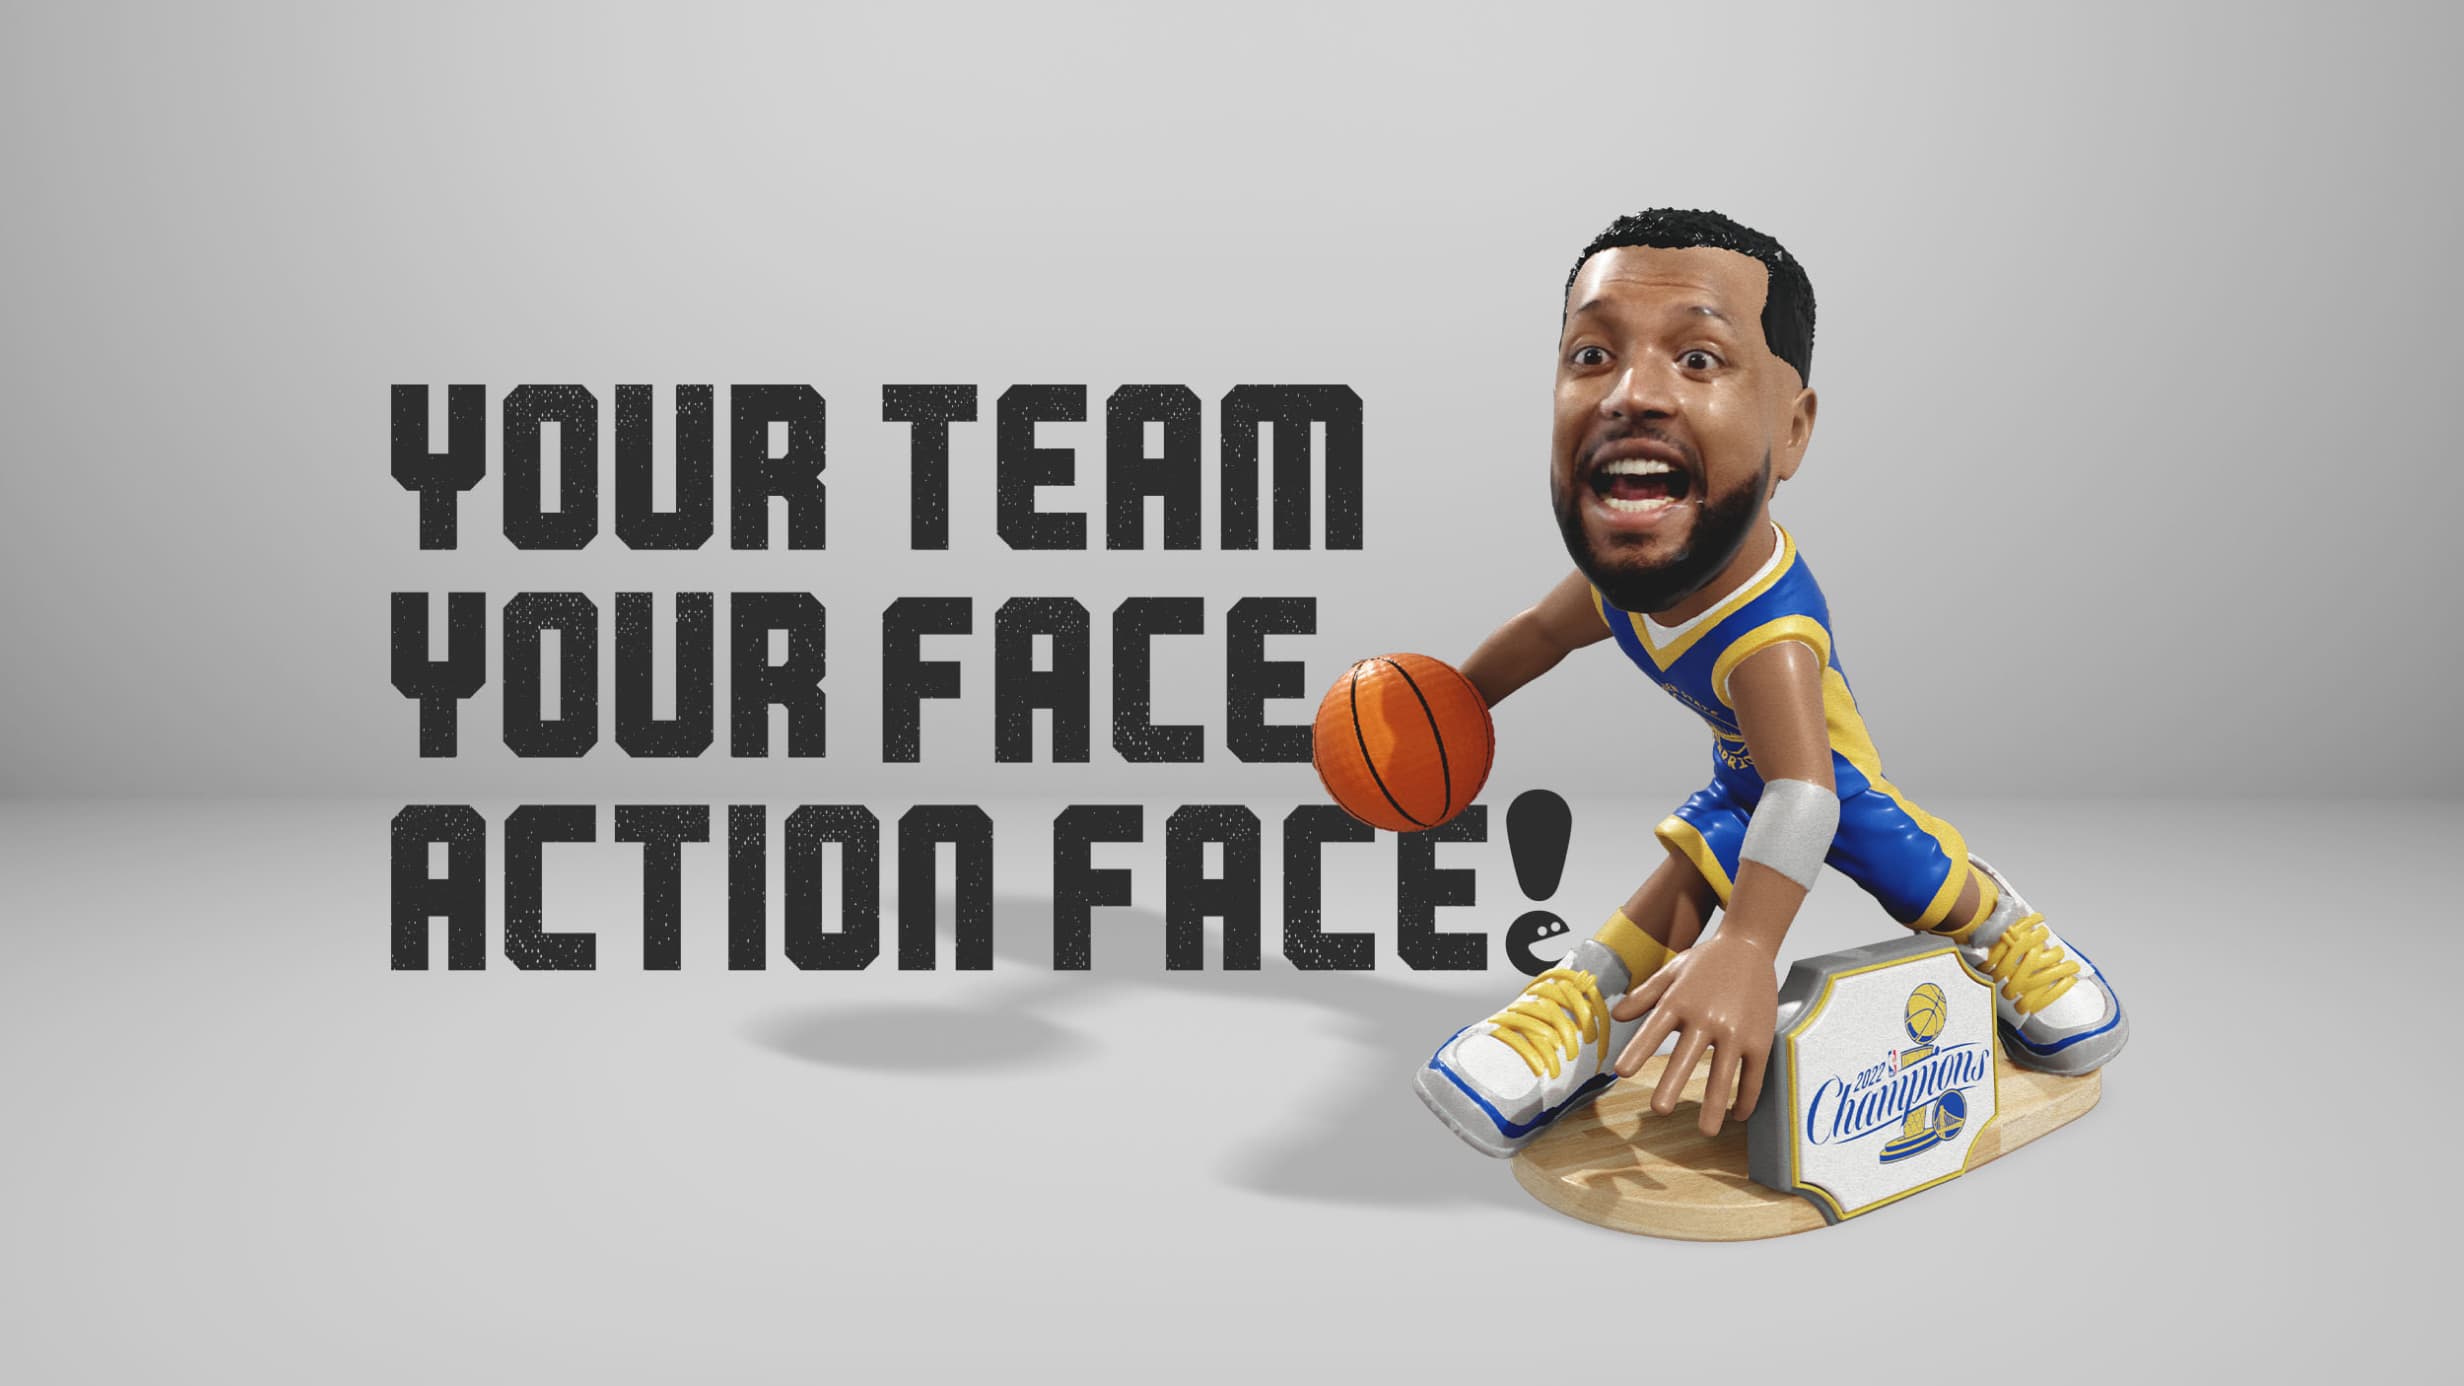 An Action Face figurine captioned with "Your team your face action face!"